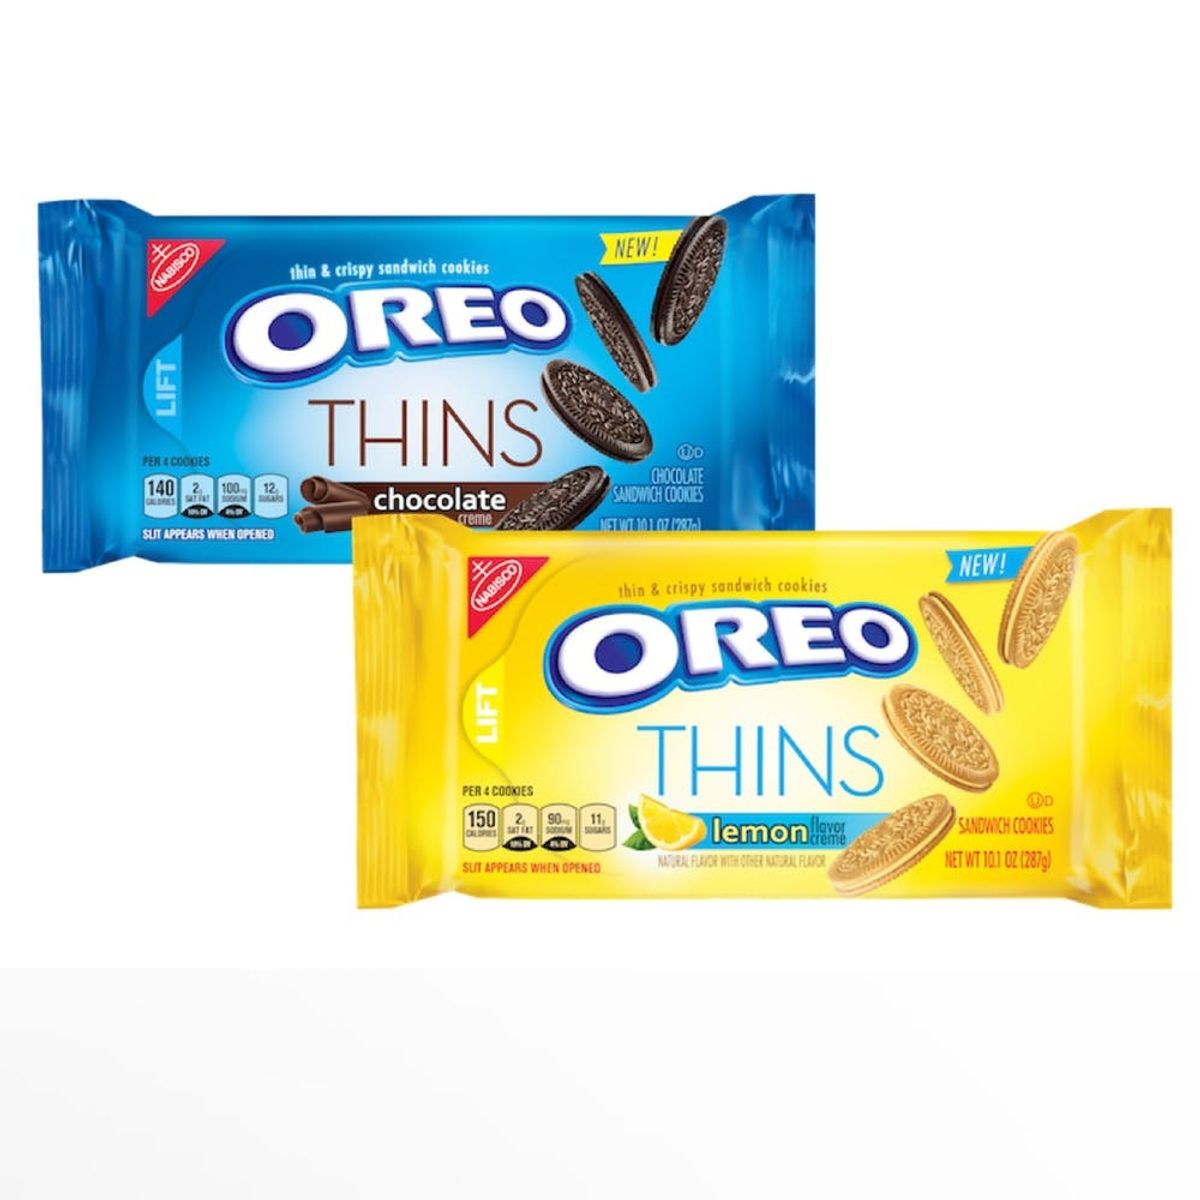 There Are 2 New Flavors of Oreos Hitting the Shelves This Summer!